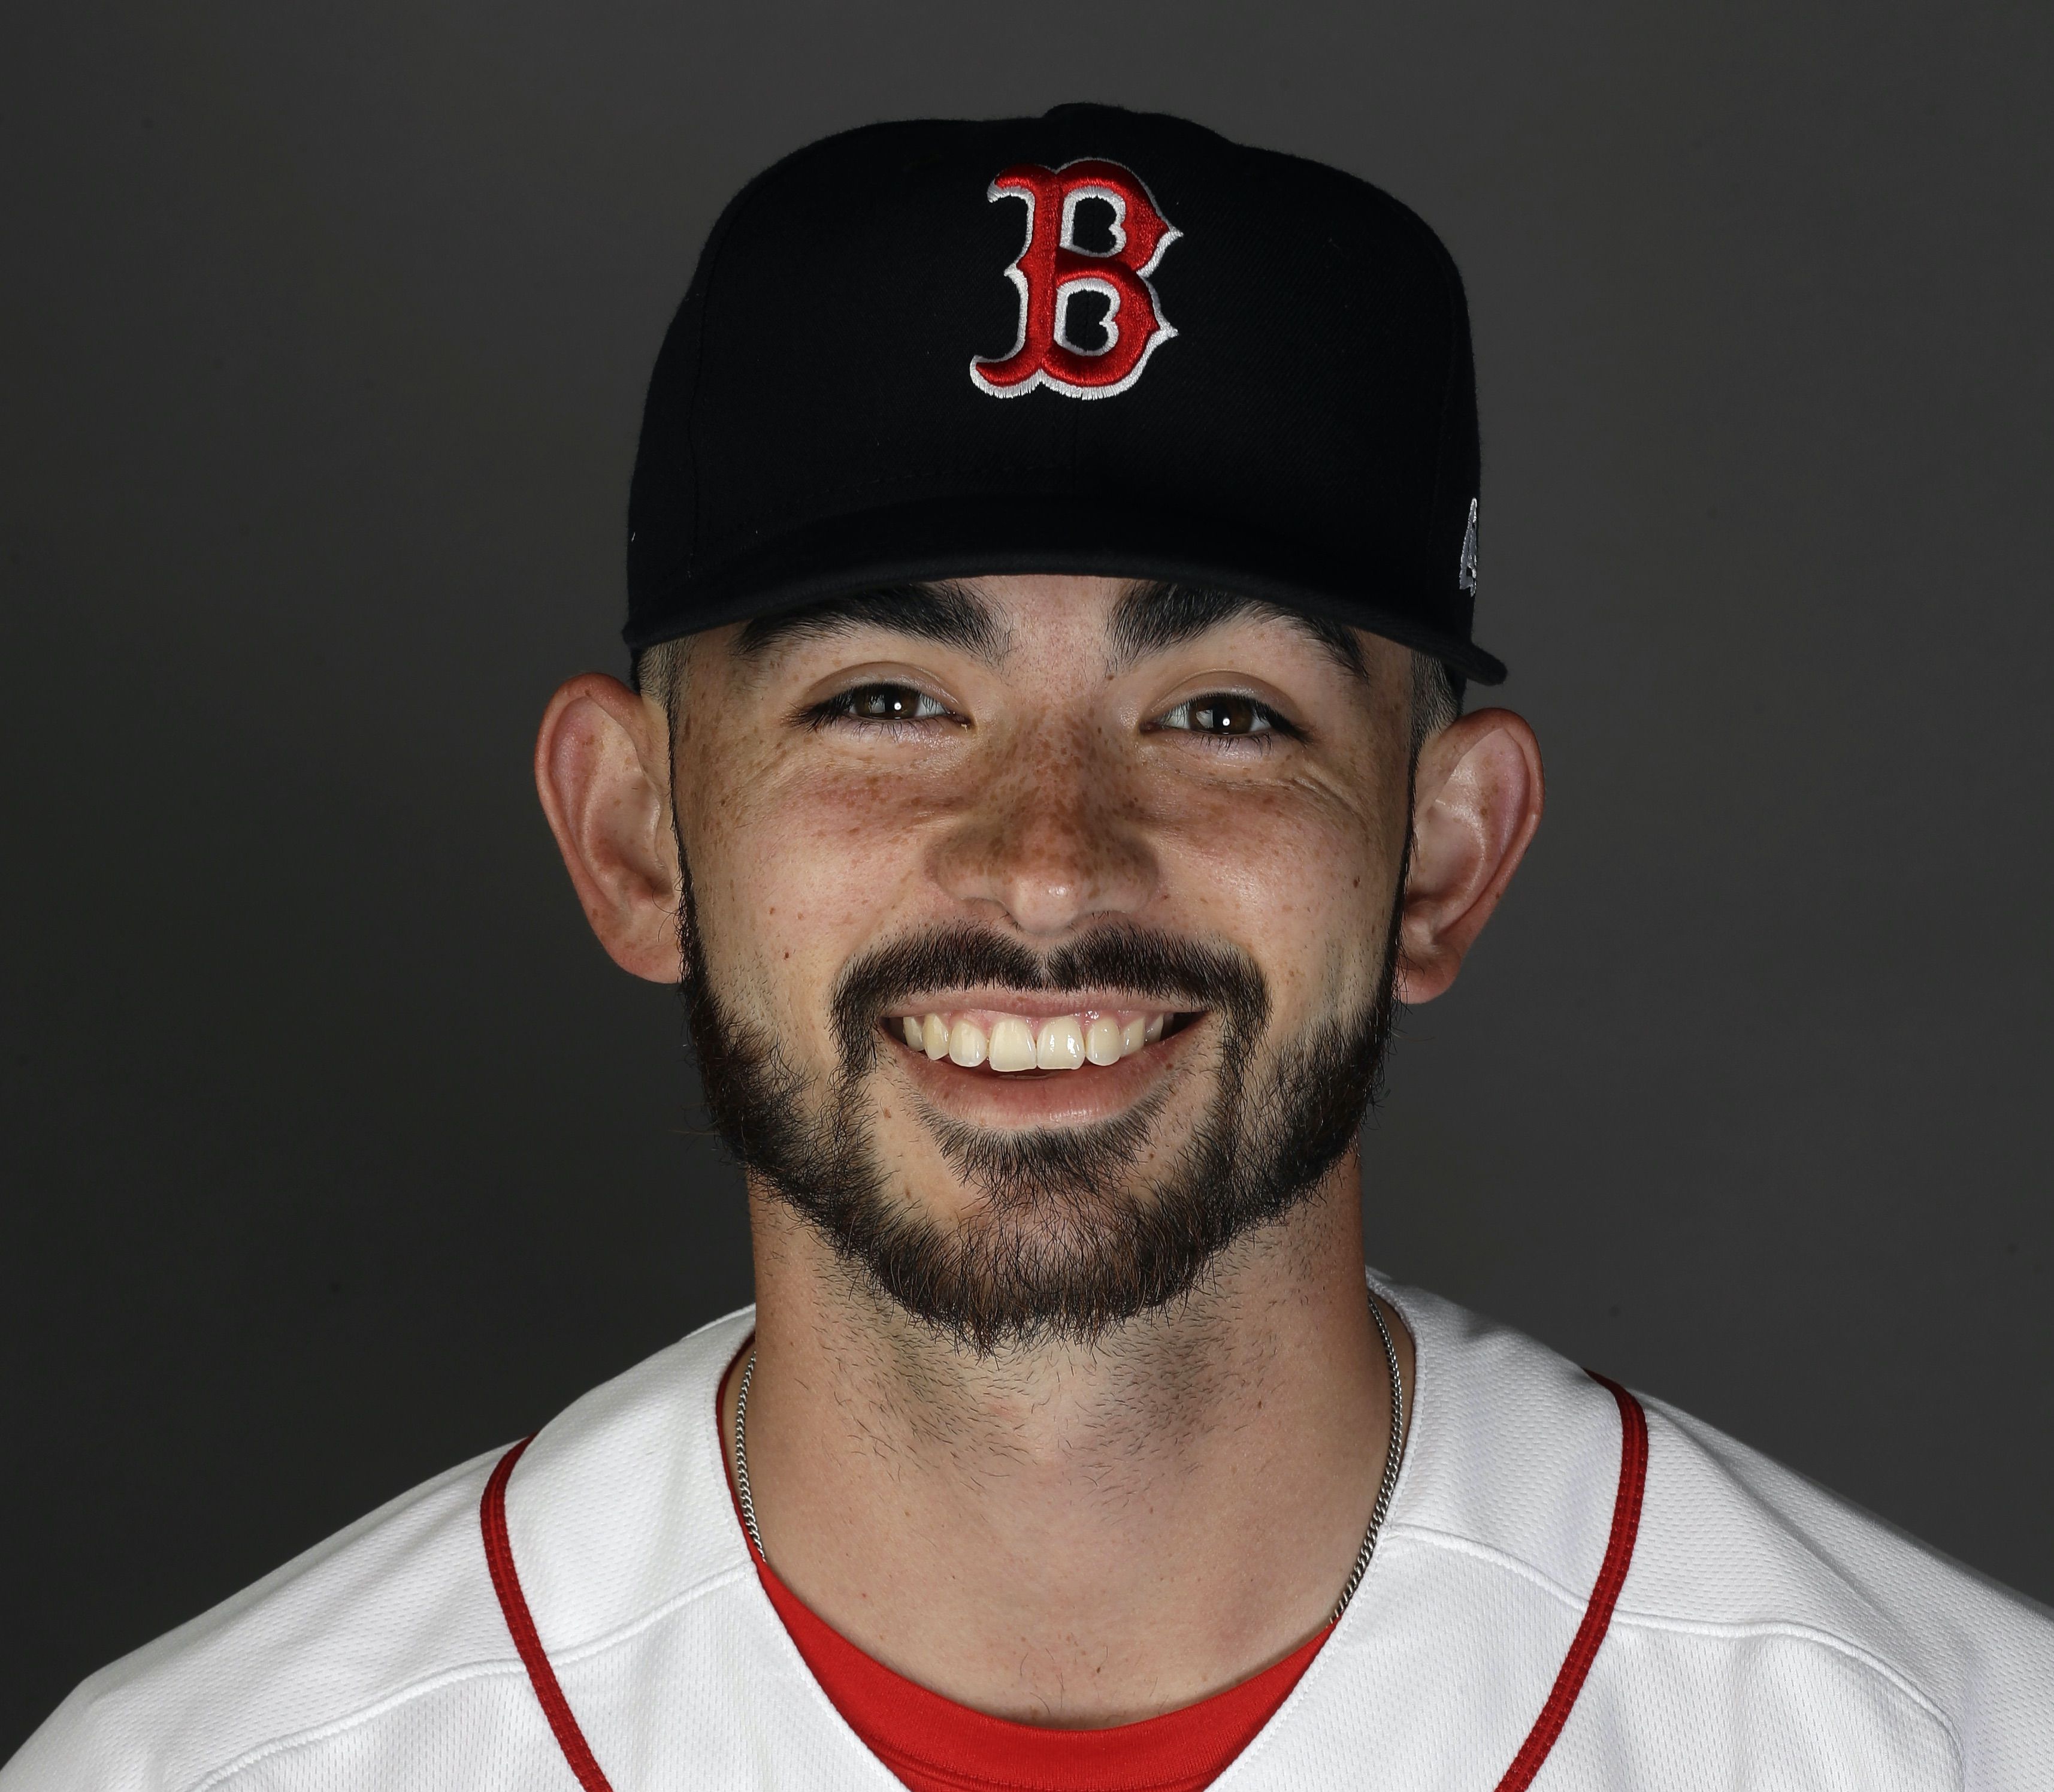 Connor Wong, Boston Red Sox catching prospect from Mookie Betts